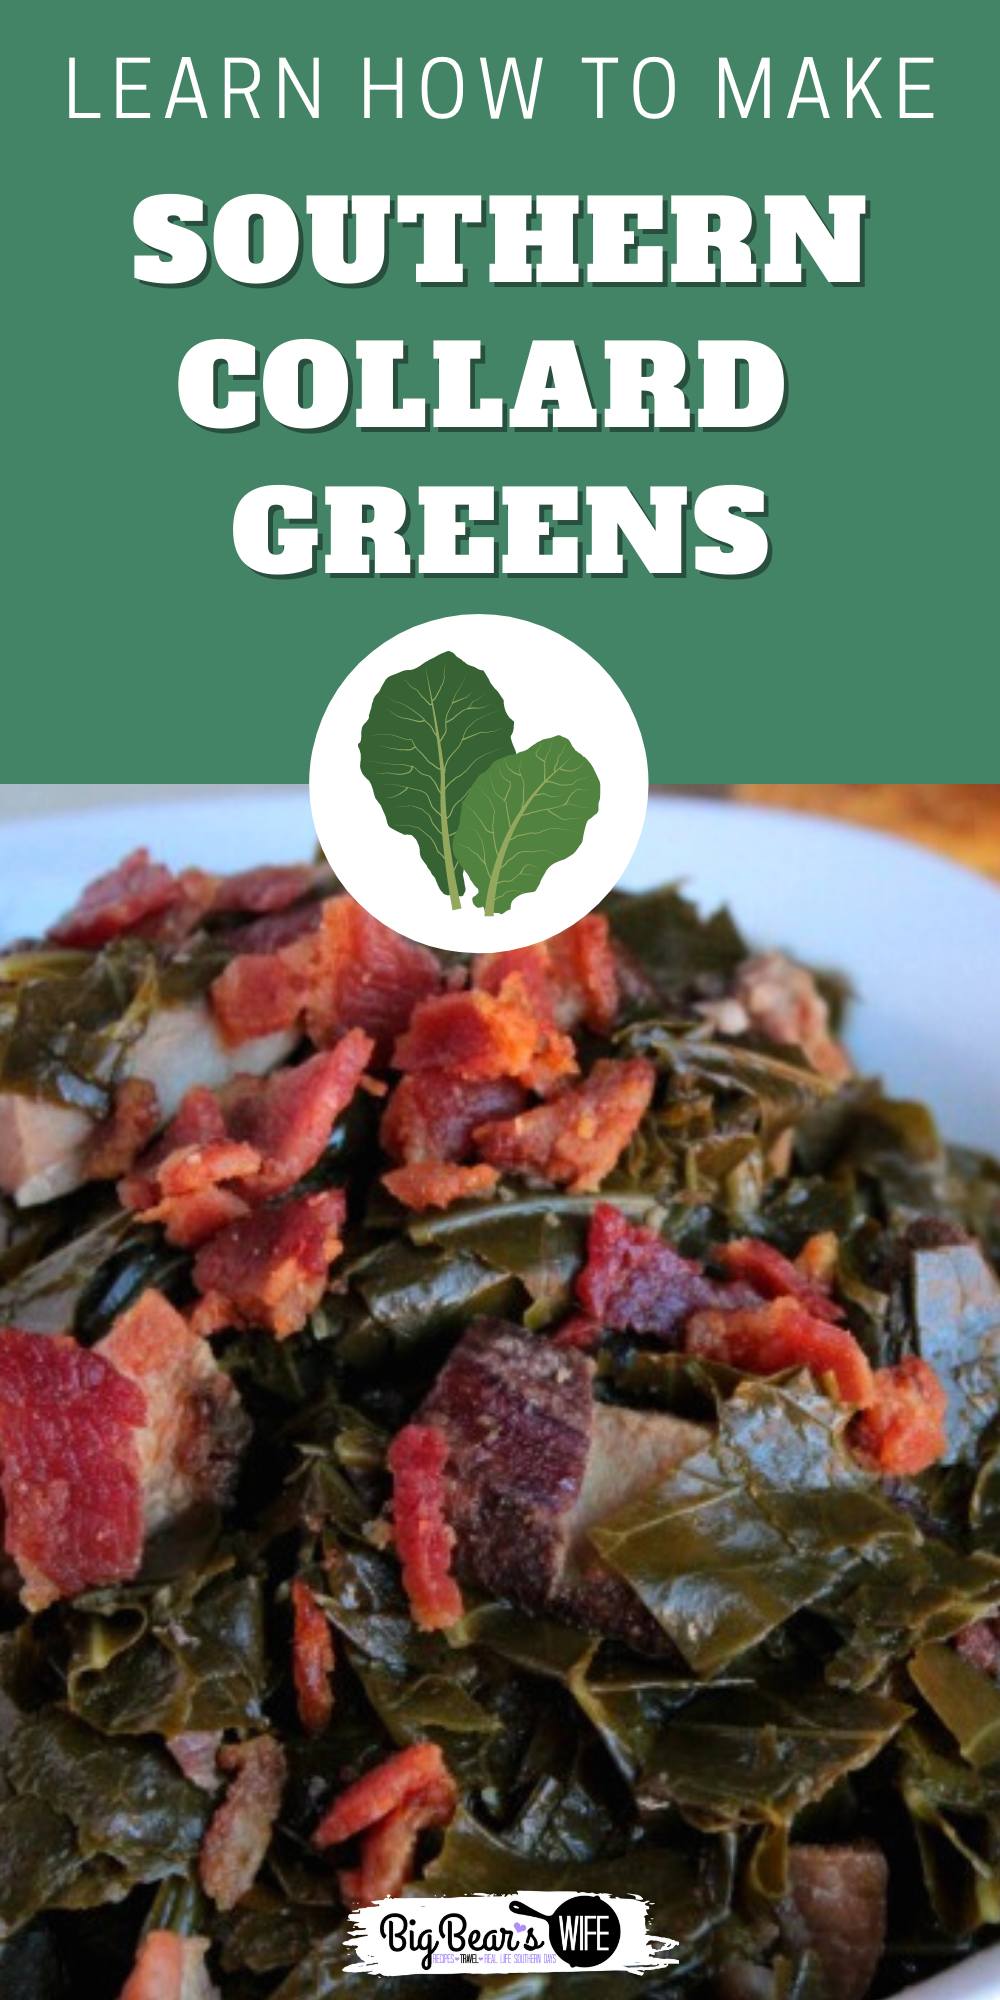 Make the best Collard Greens that you've ever had by slowly cooking them southern style! Southern Slow Cooked Collard Greens are full of amazing flavors!
This recipe for Southern Slow Cooked Collard Greens is one of our favorites to make for New Years Eve! We also love to make Southern Slow Cooked Collard Greens to serve with brisket, BBQ Chicken and BBQ Ribs!  via @bigbearswife